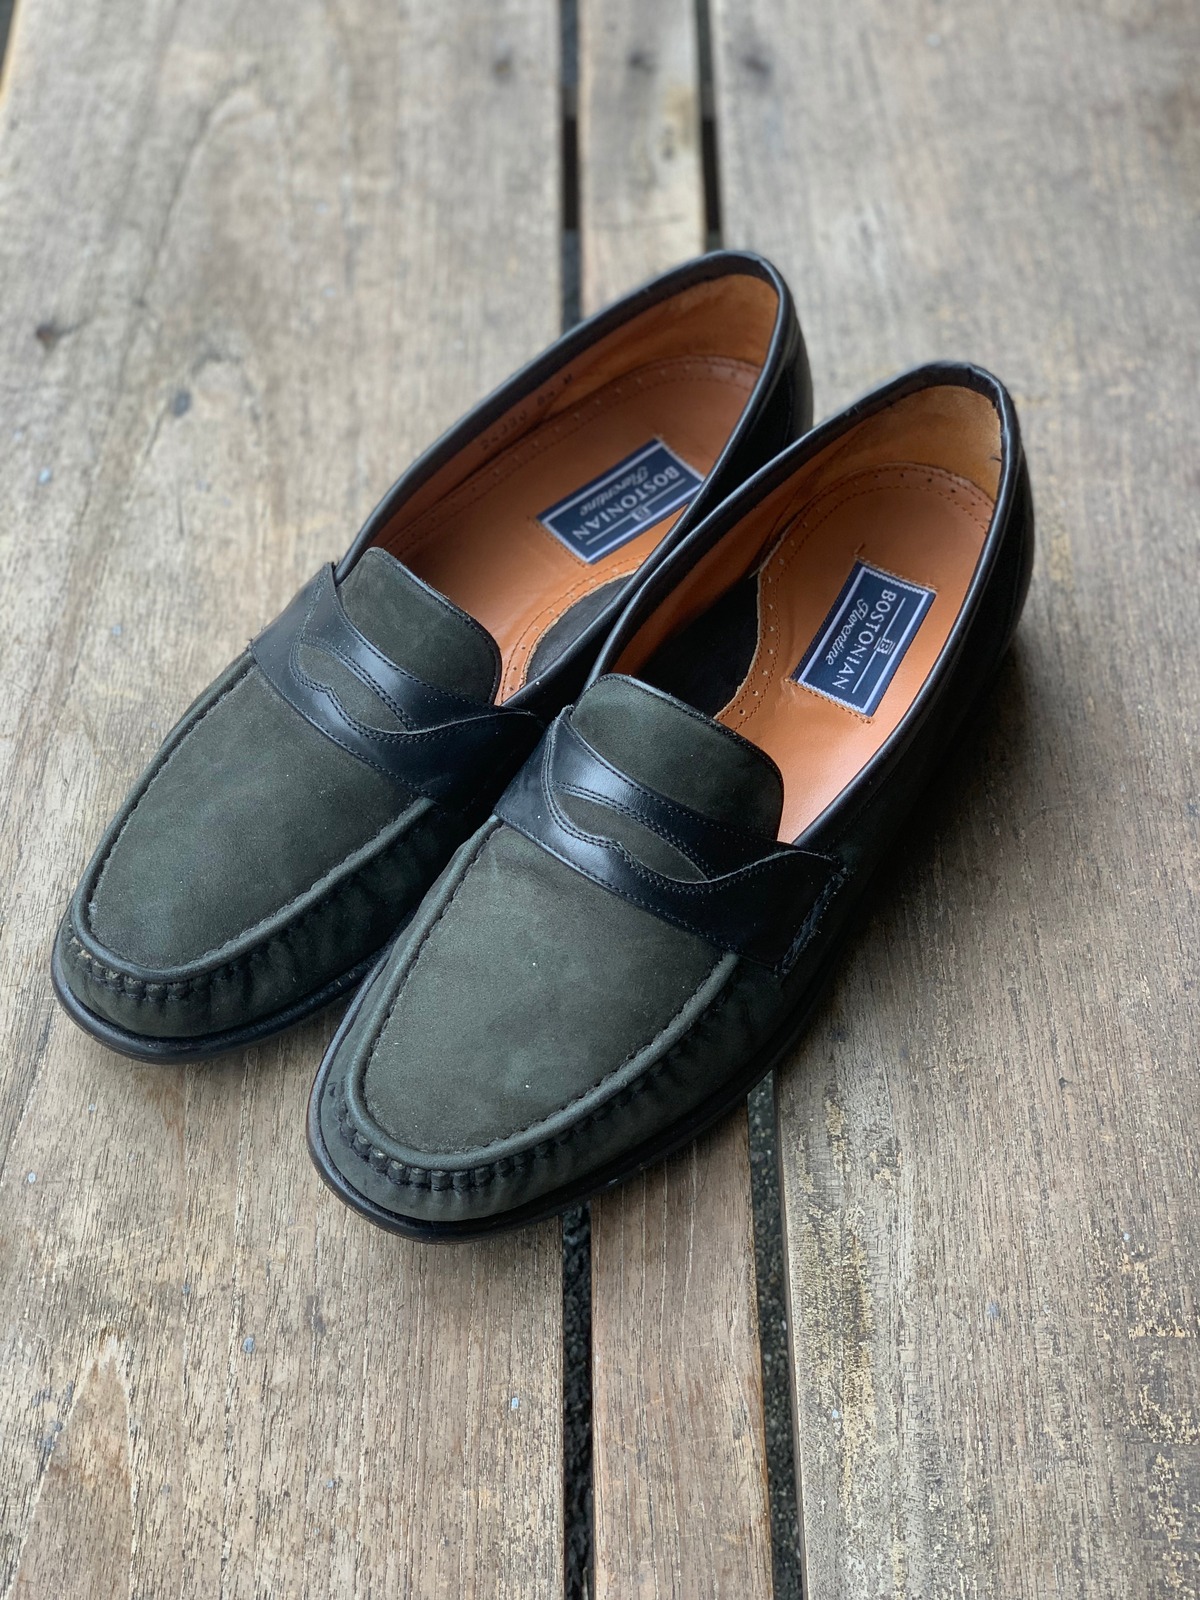 Bostonian penny loafer made in ITALY | Gian